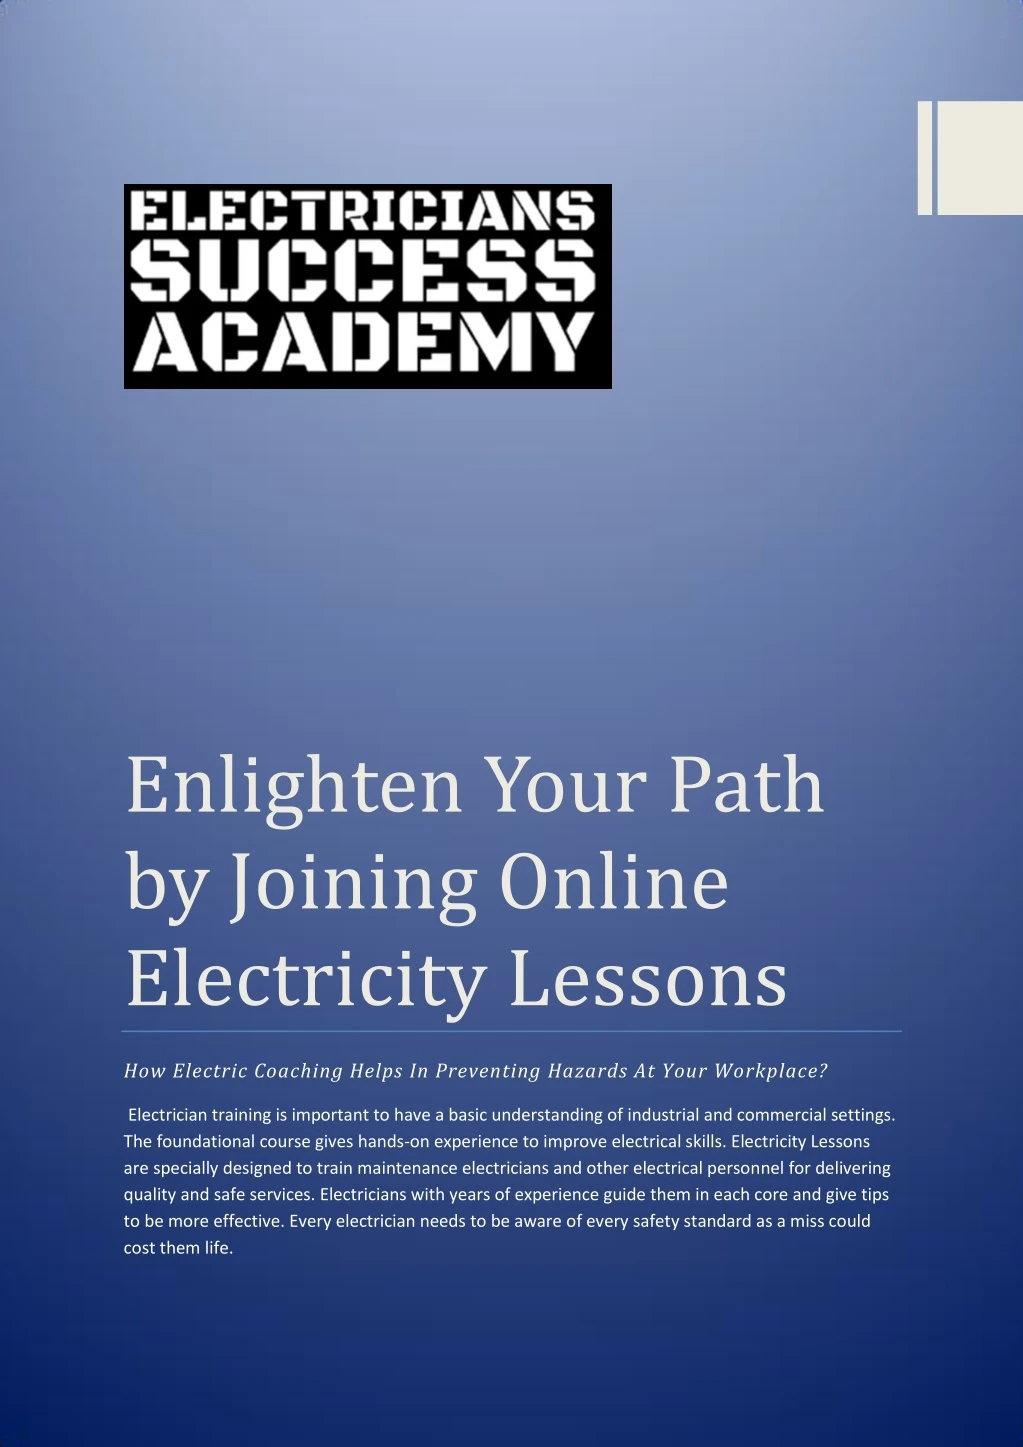 enlighten your path by joining online electricity